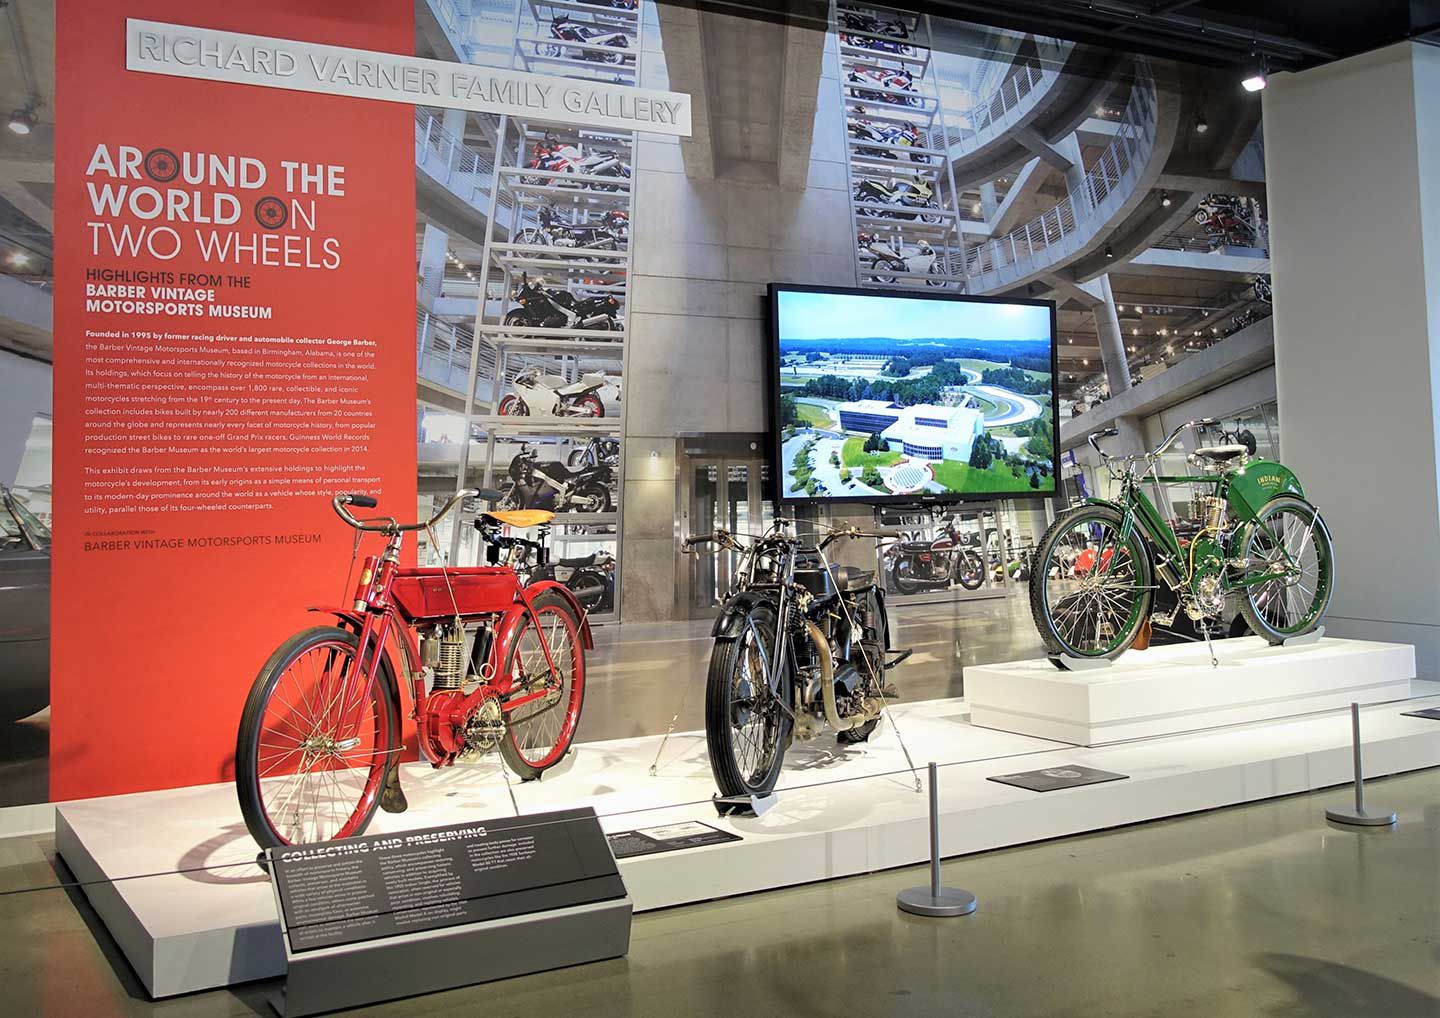 Merkel, Sunbeam, Indian: another look at the front display of the “Around the World on Two Wheels” exhibit.